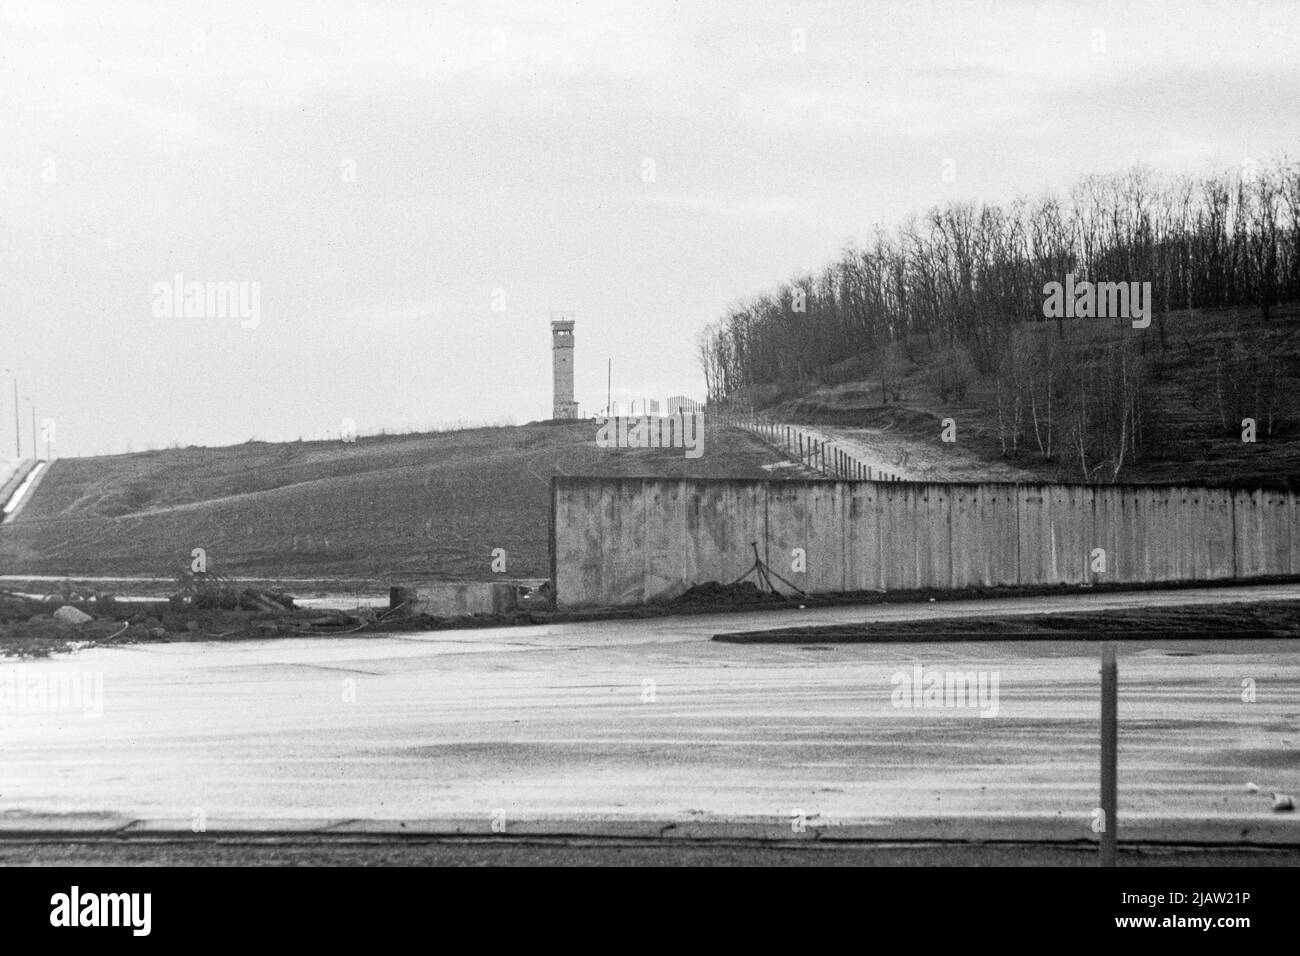 The East German border at Staaken between East and West Berlin in 1991 Stock Photo